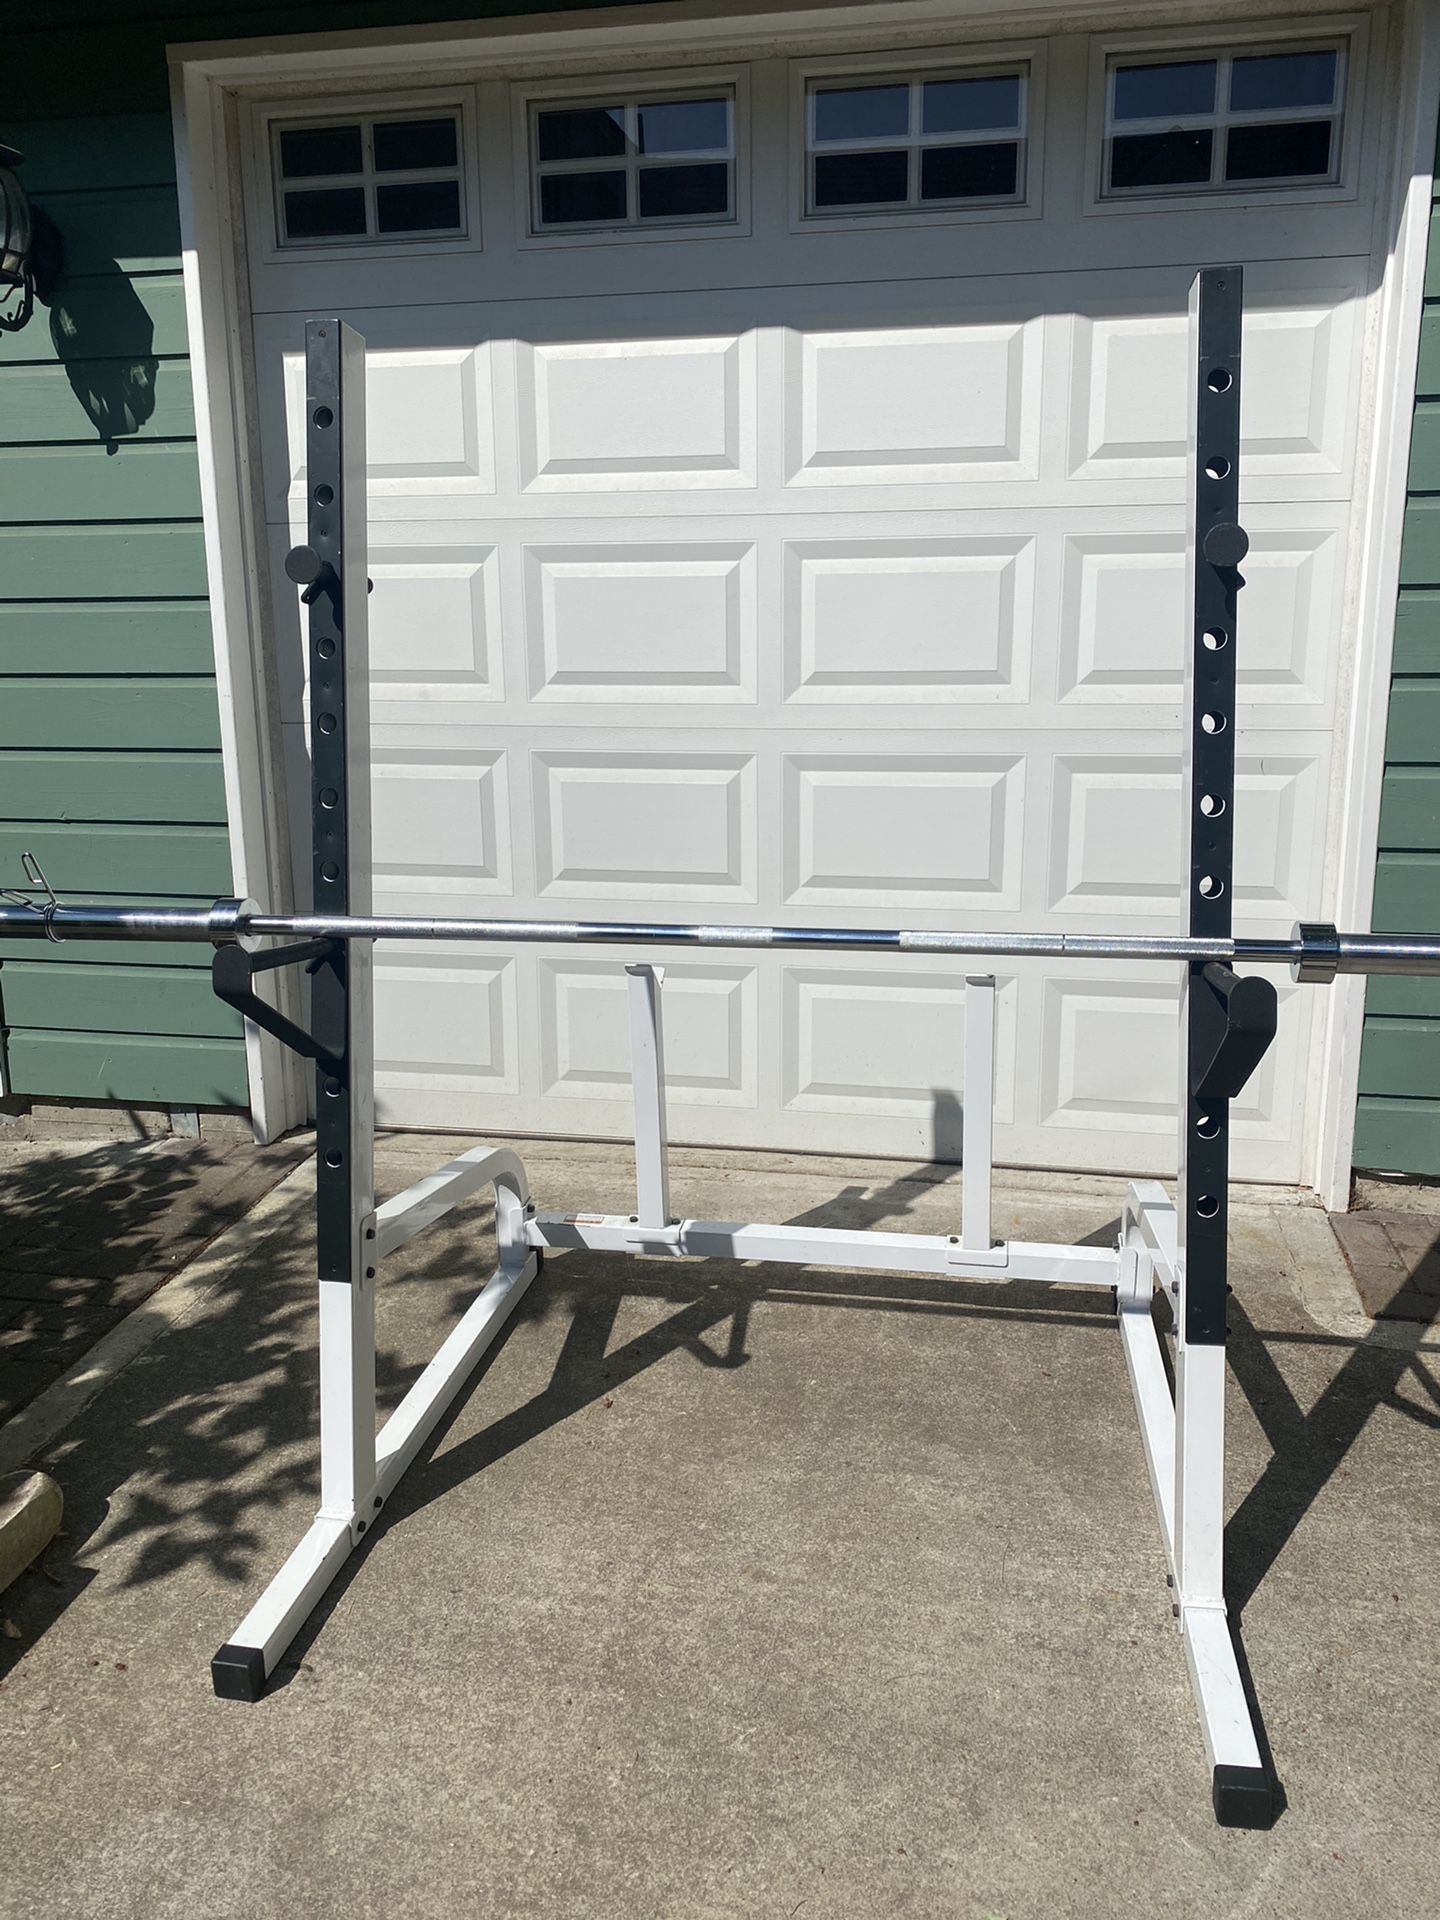 Squat Rack - Olympic Barbell sold separately